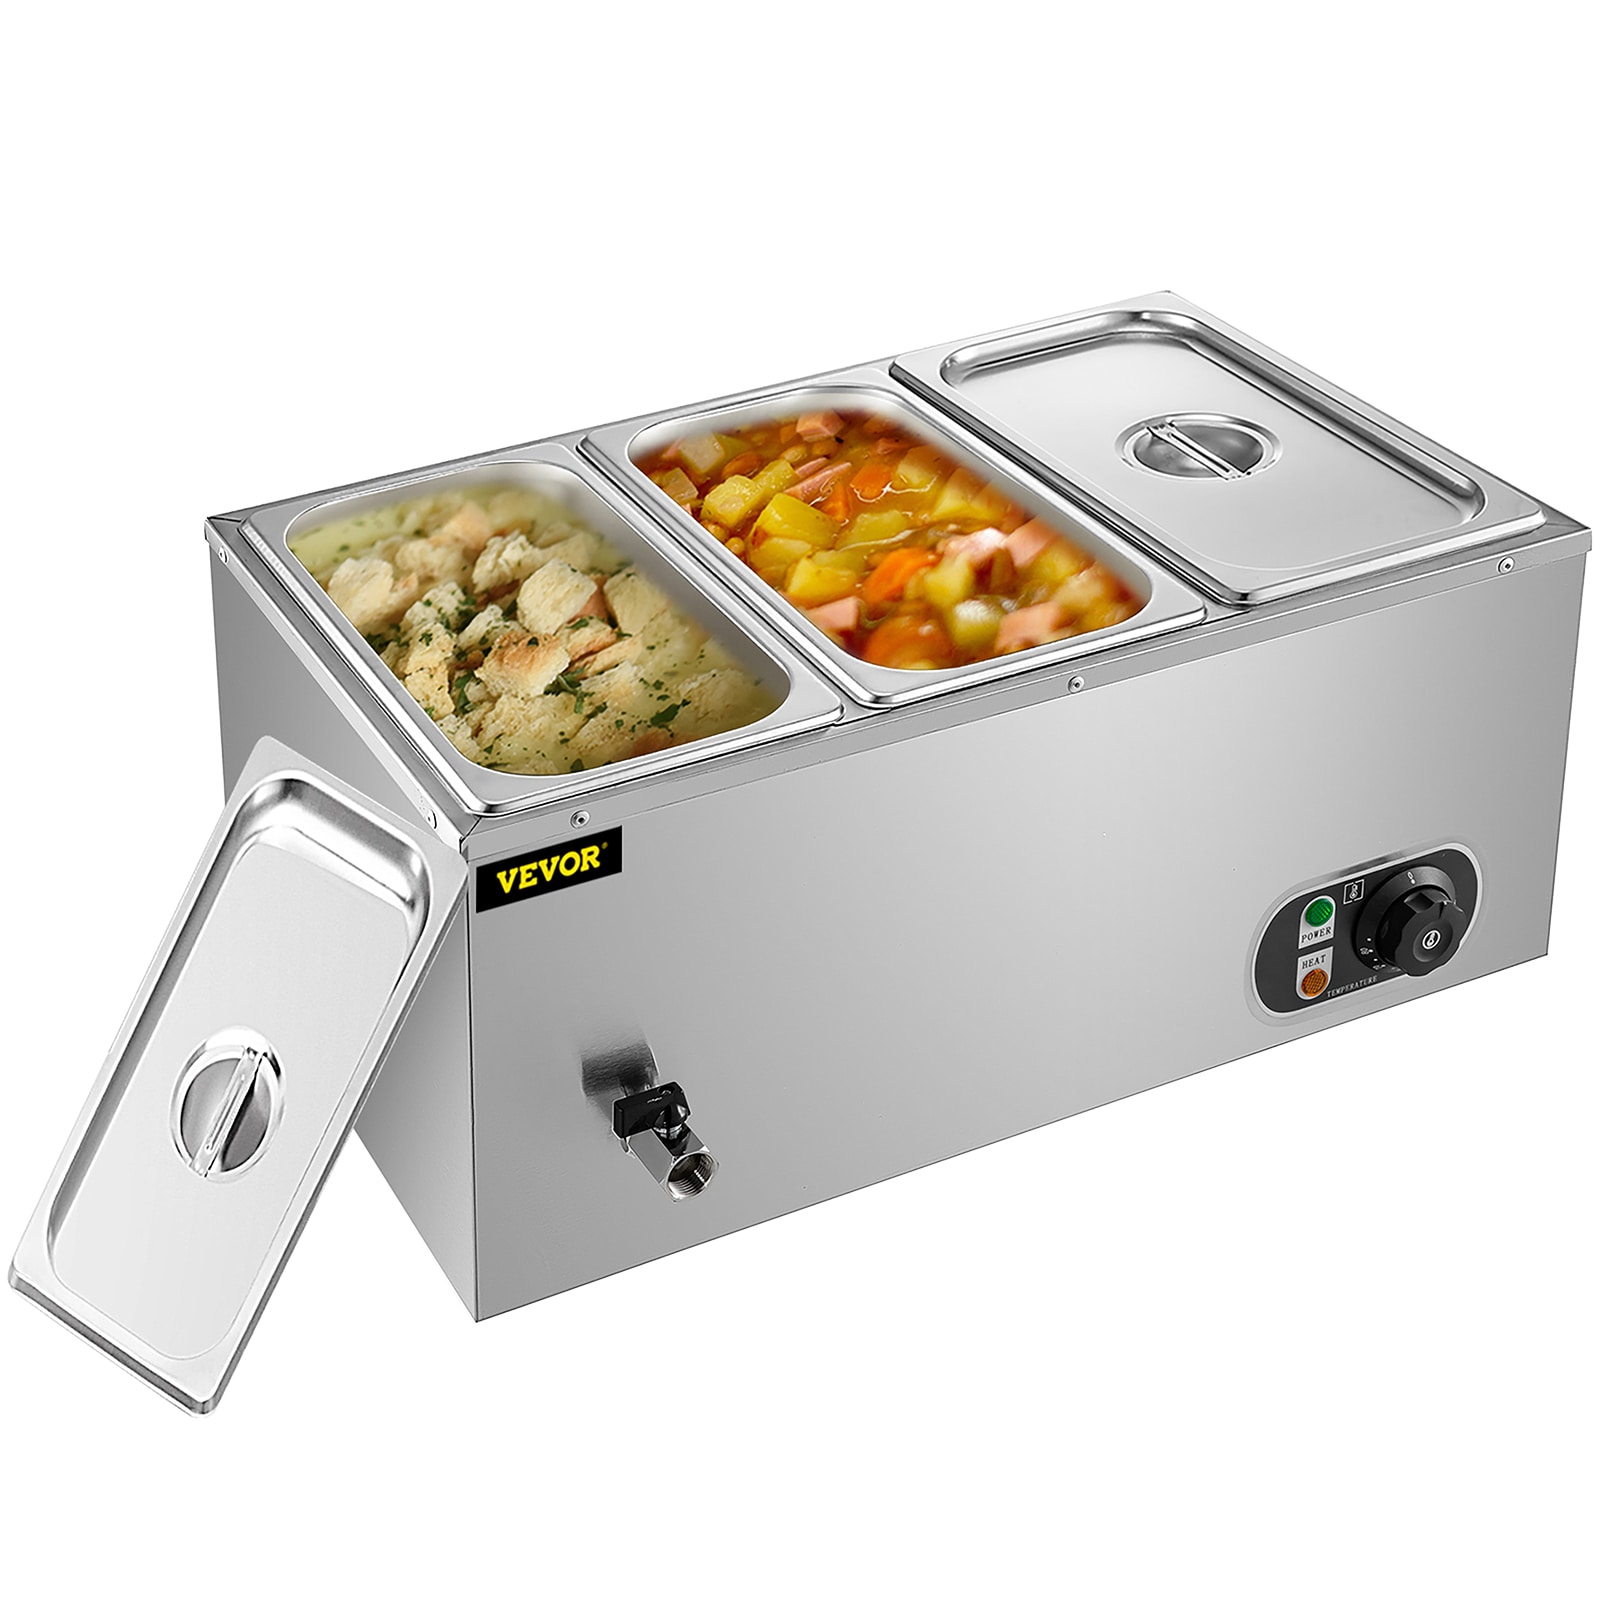 VEVOR 110V 3-Pan Commercial Food Warmer, 1200W Electric Steam Table  15cm/6inch Deep, Professional Stainless Steel Buffet Bain Marie 16 Quart  for Catering and Restaurants in the Buffet Servers & Warming Trays  department